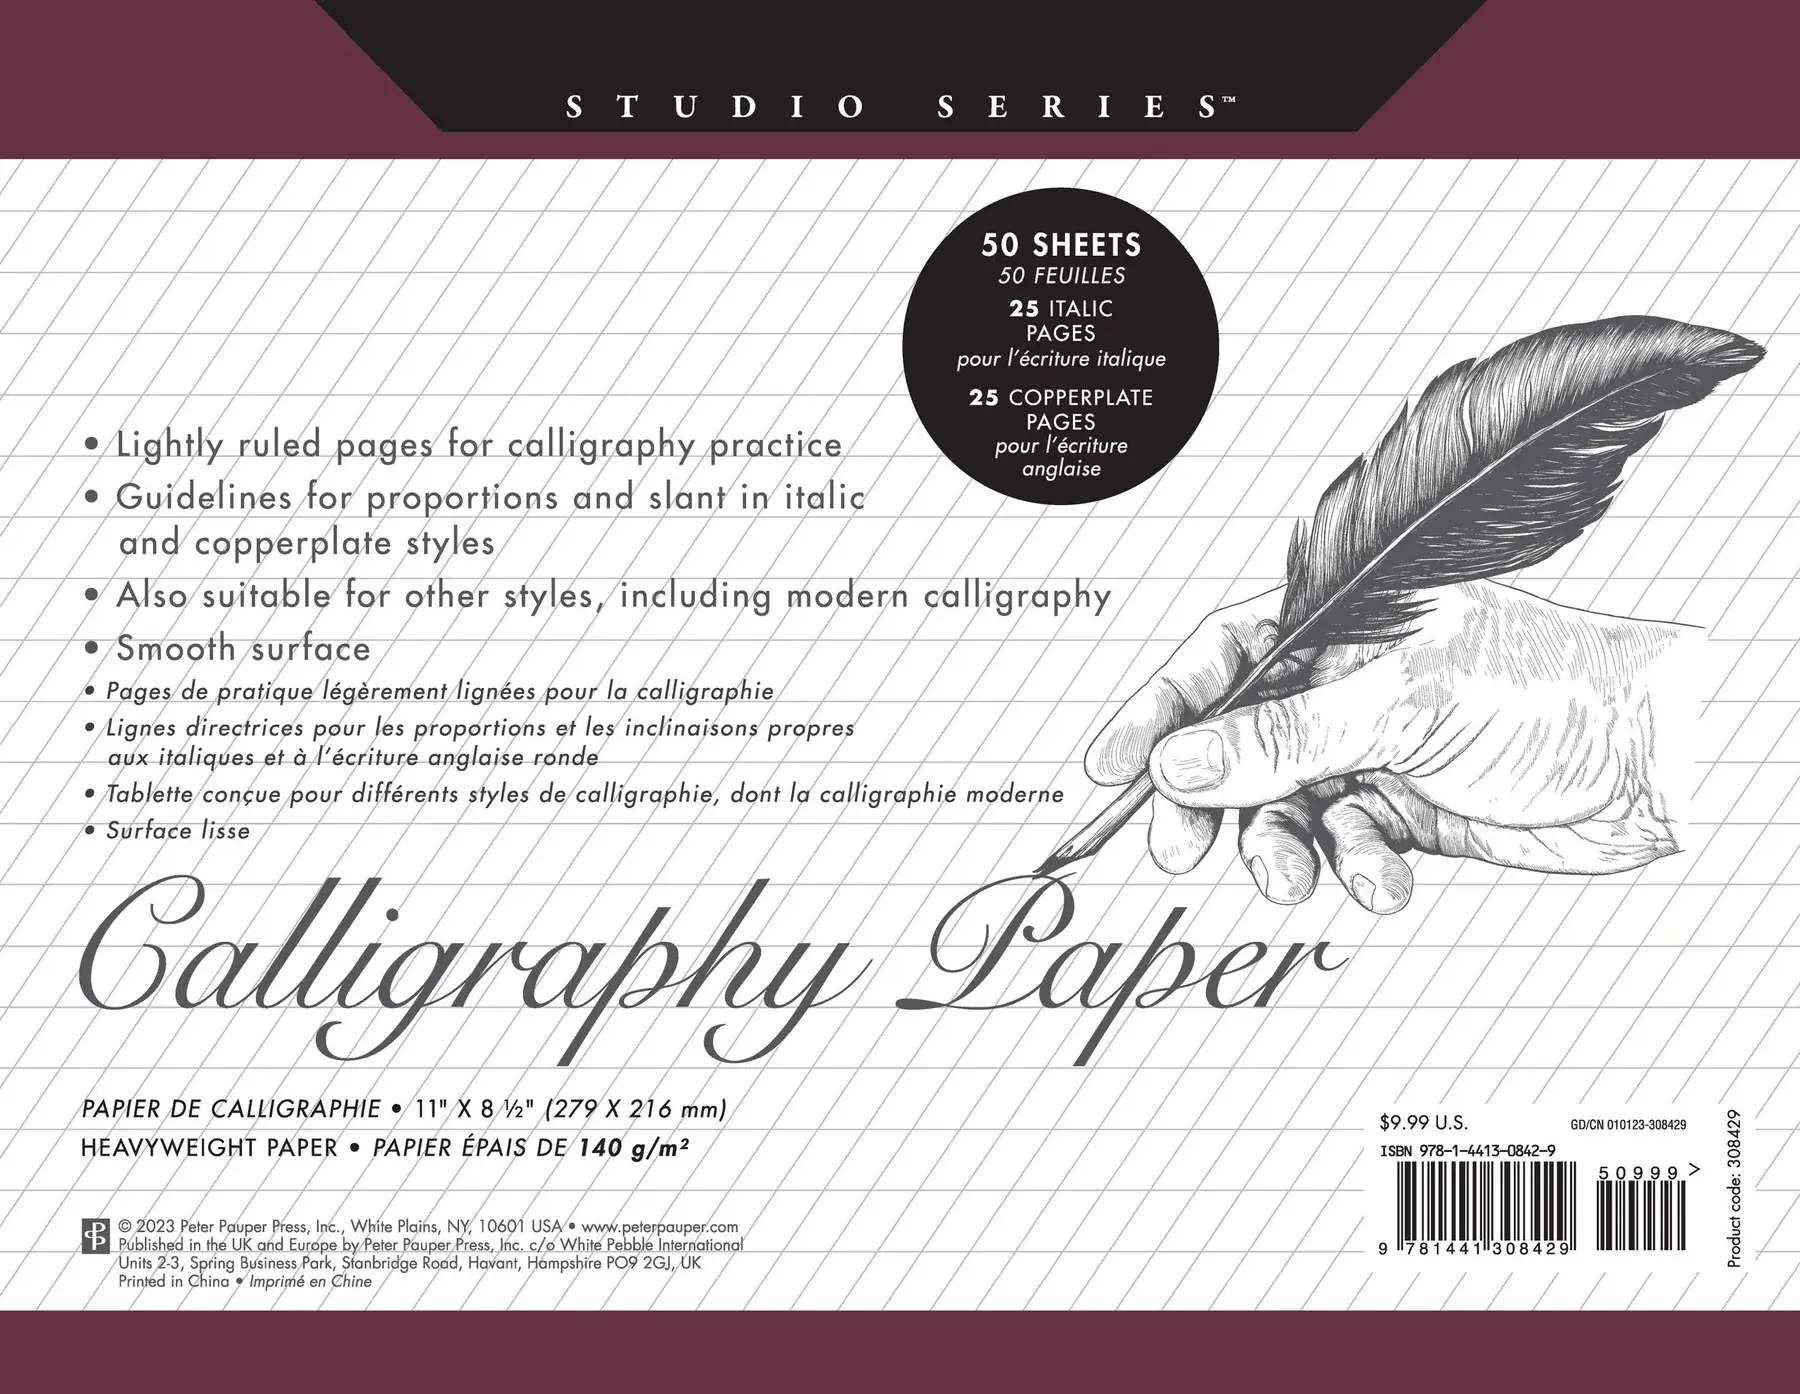 Calligraphy Writing Paper: 150 sheet pad, calligraphy practice paper and  workbook for lettering artist and lettering for beginners